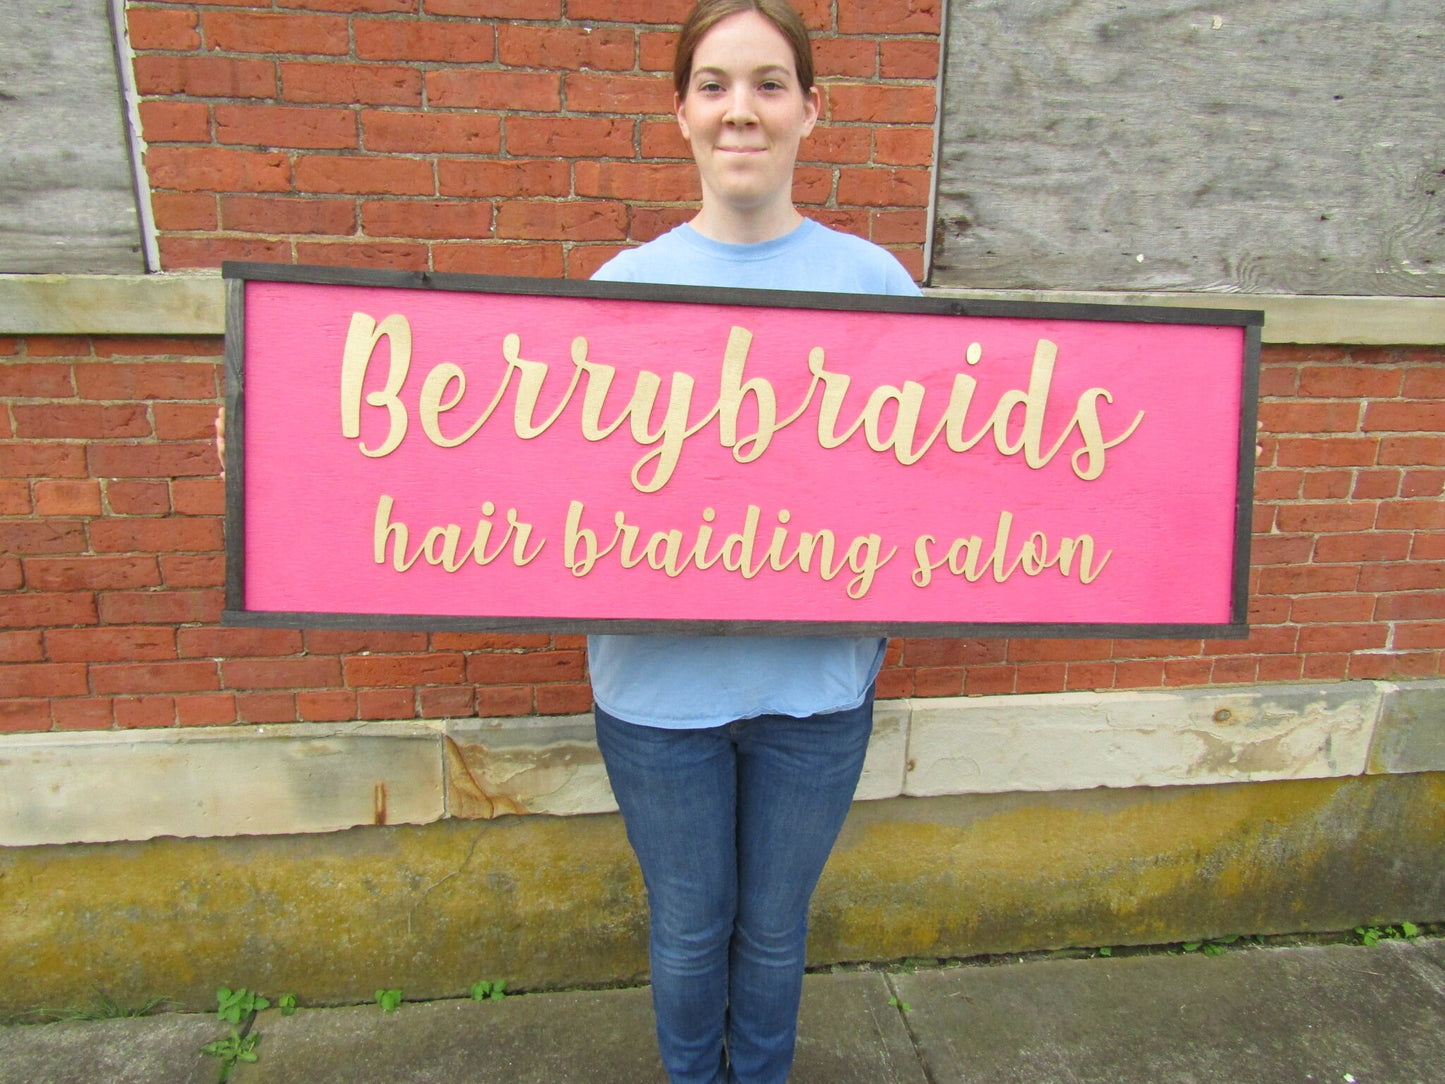 Custom Berry Braids Hair Salon Signage Commerical Business Sign Bright Pink Gold Handmade Wooden Large Entrance Sign Building Outdoor Walkin